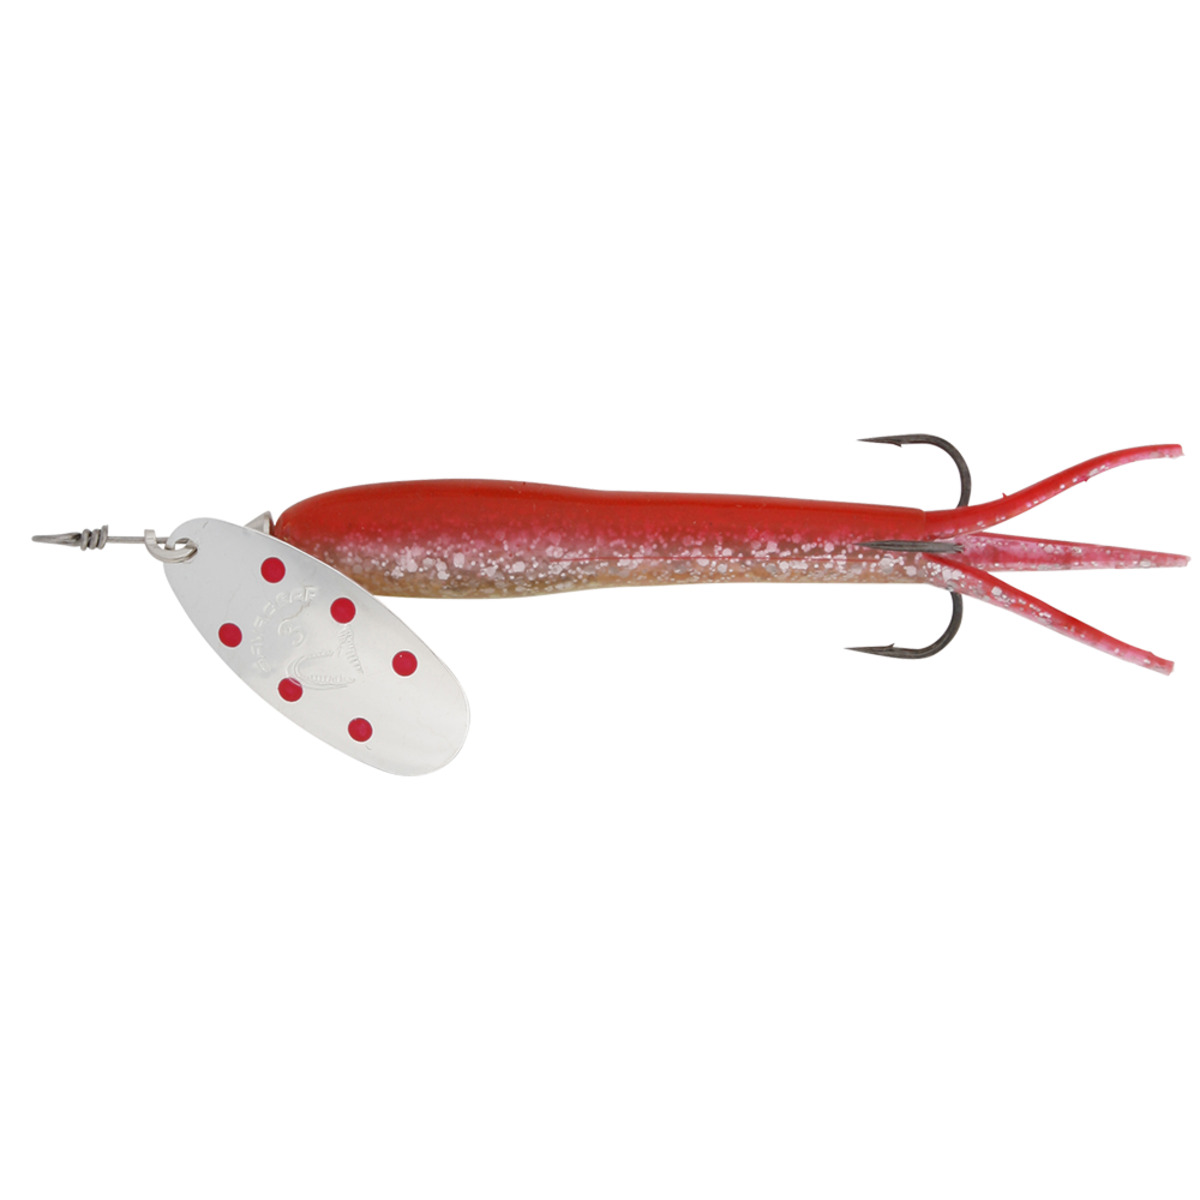 Savage Gear Flying Eel Spinner #3 23g Sinking - RED/SILVER